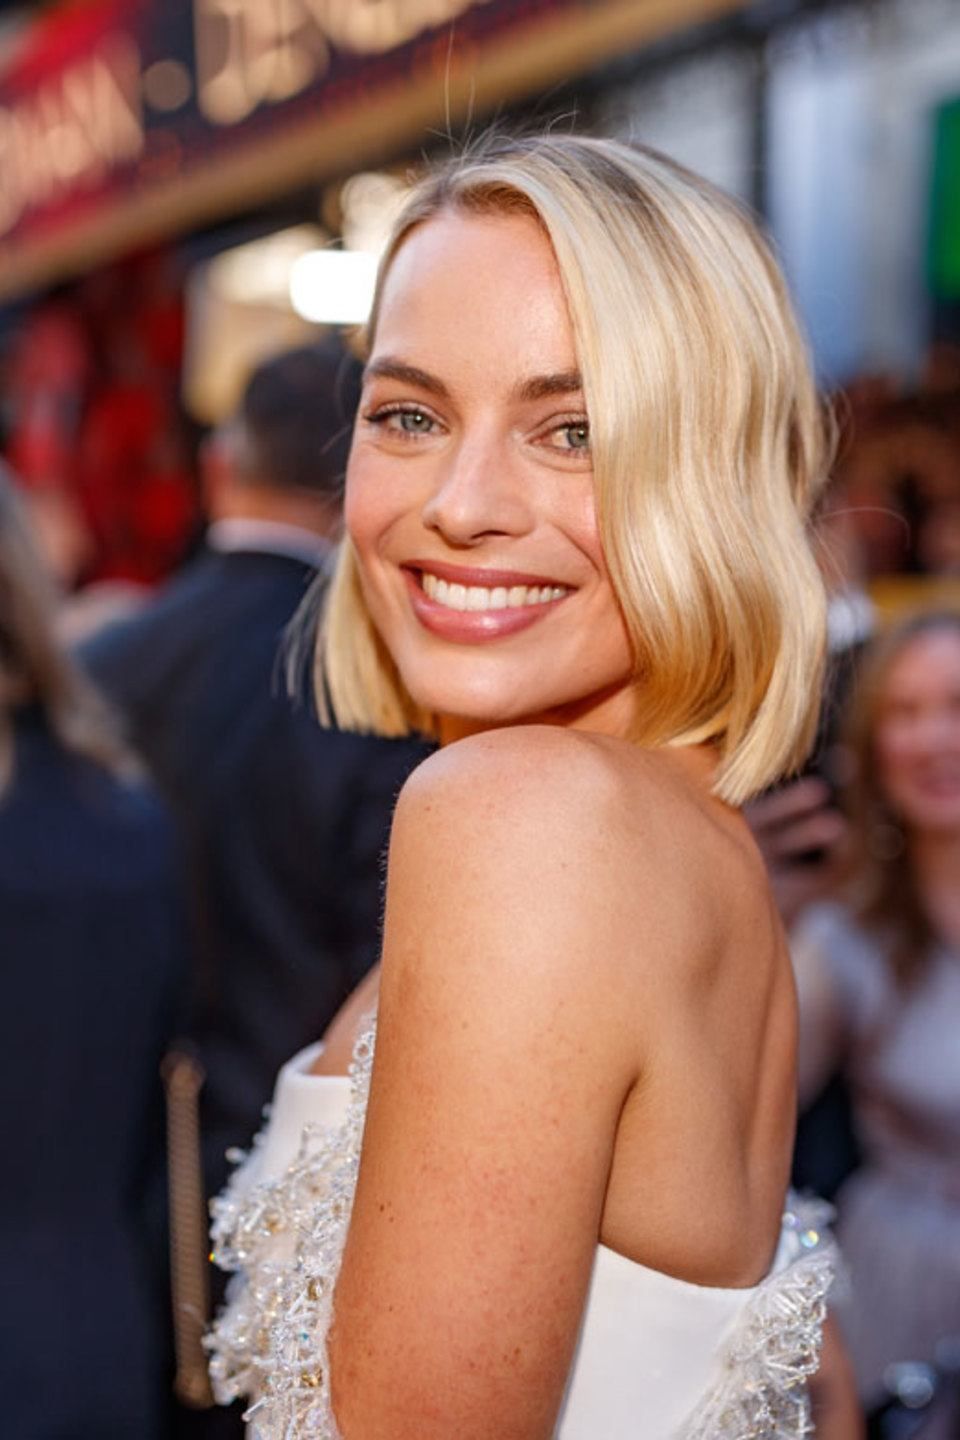 Margot Robbie attends the 90th Annual Academy Awards at Hollywood & Highland Center on March 4, 2018 in Hollywood, California. (Photo by Christopher Polk/Getty Images)